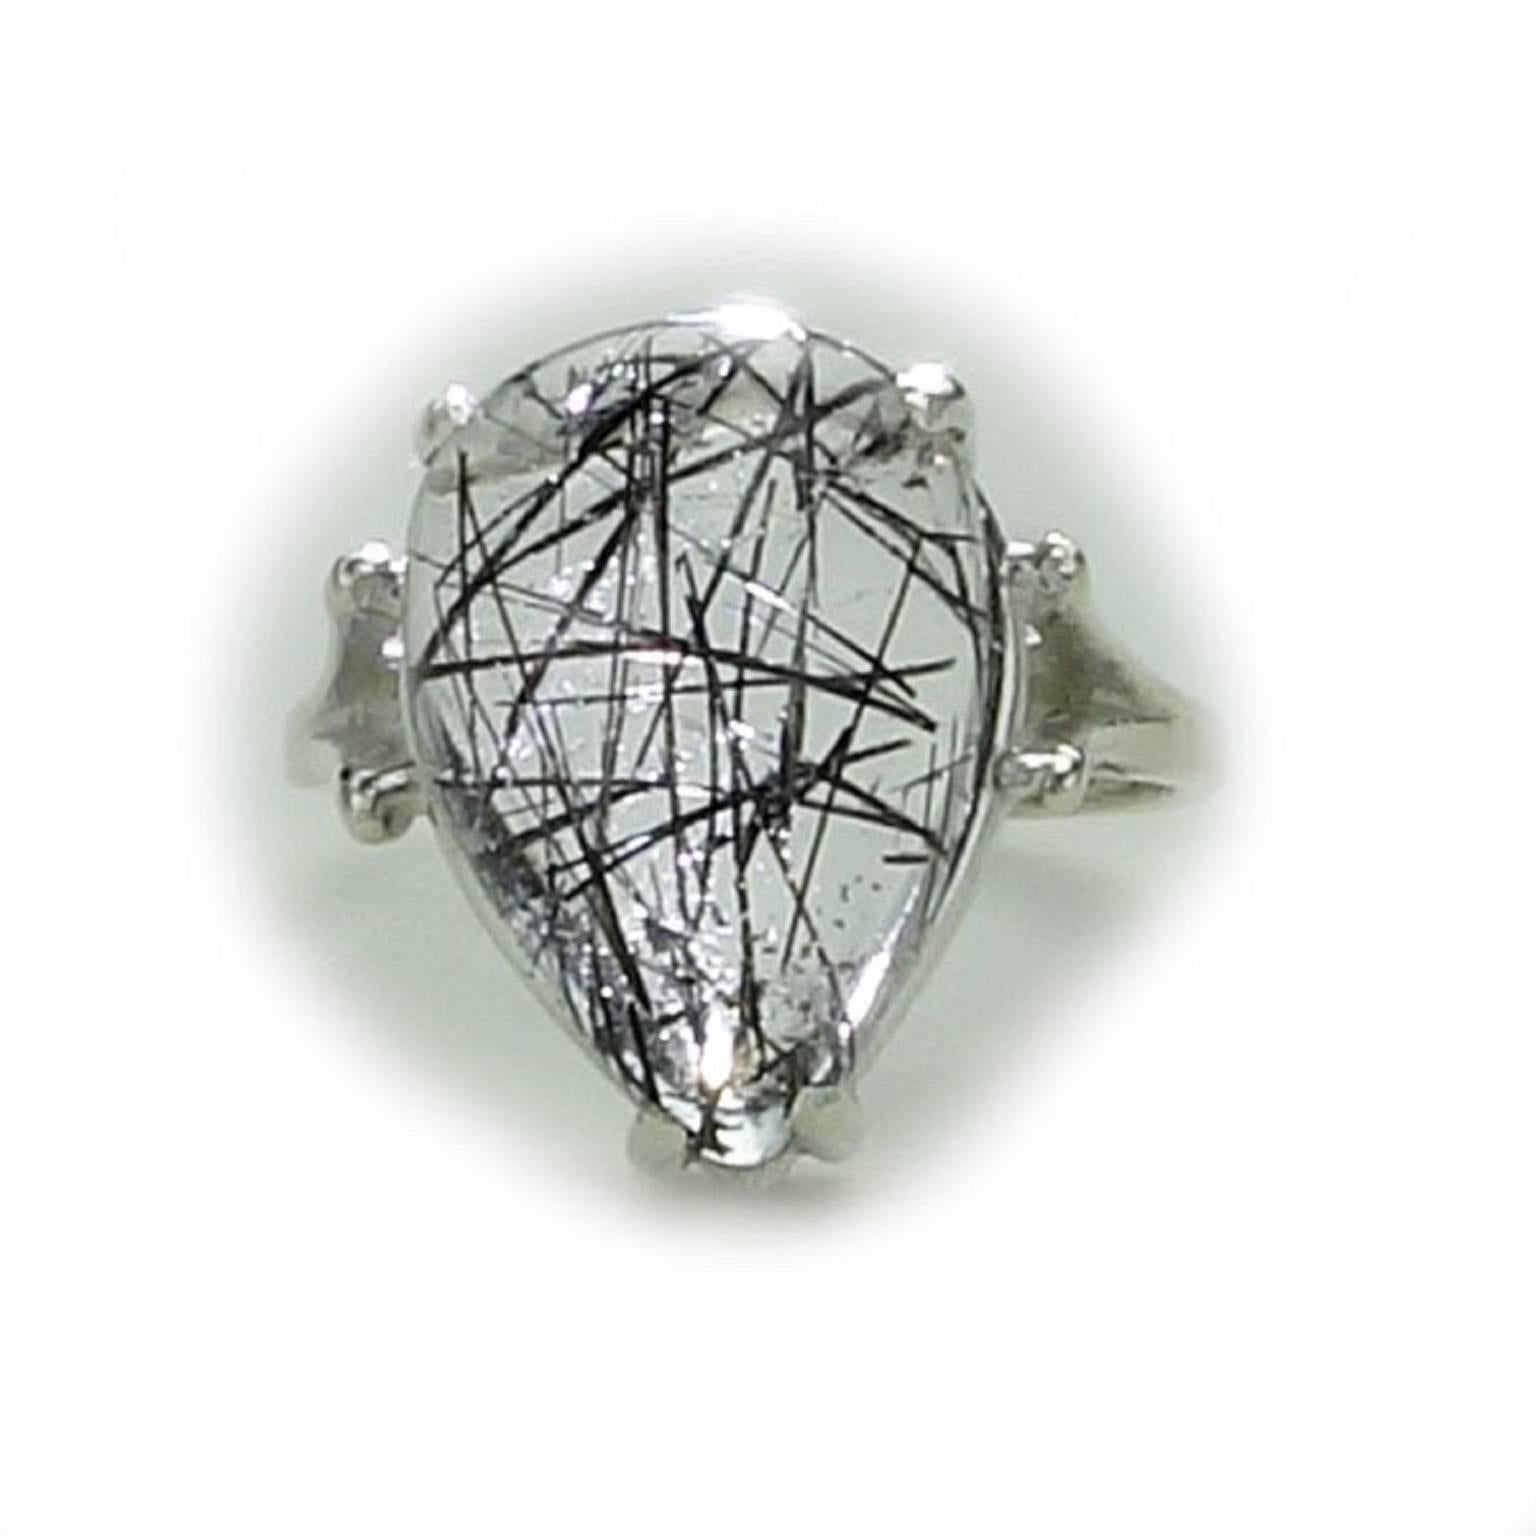 Custom made Sterling Silver ring featuring a sparkling Clear Quartz with Black tourmaline rods in a pear-shaped cabochon. This unique gemstone is from our favorite supplier in the mountains outside of Rio de Janeiro. It is perfect for all of you who